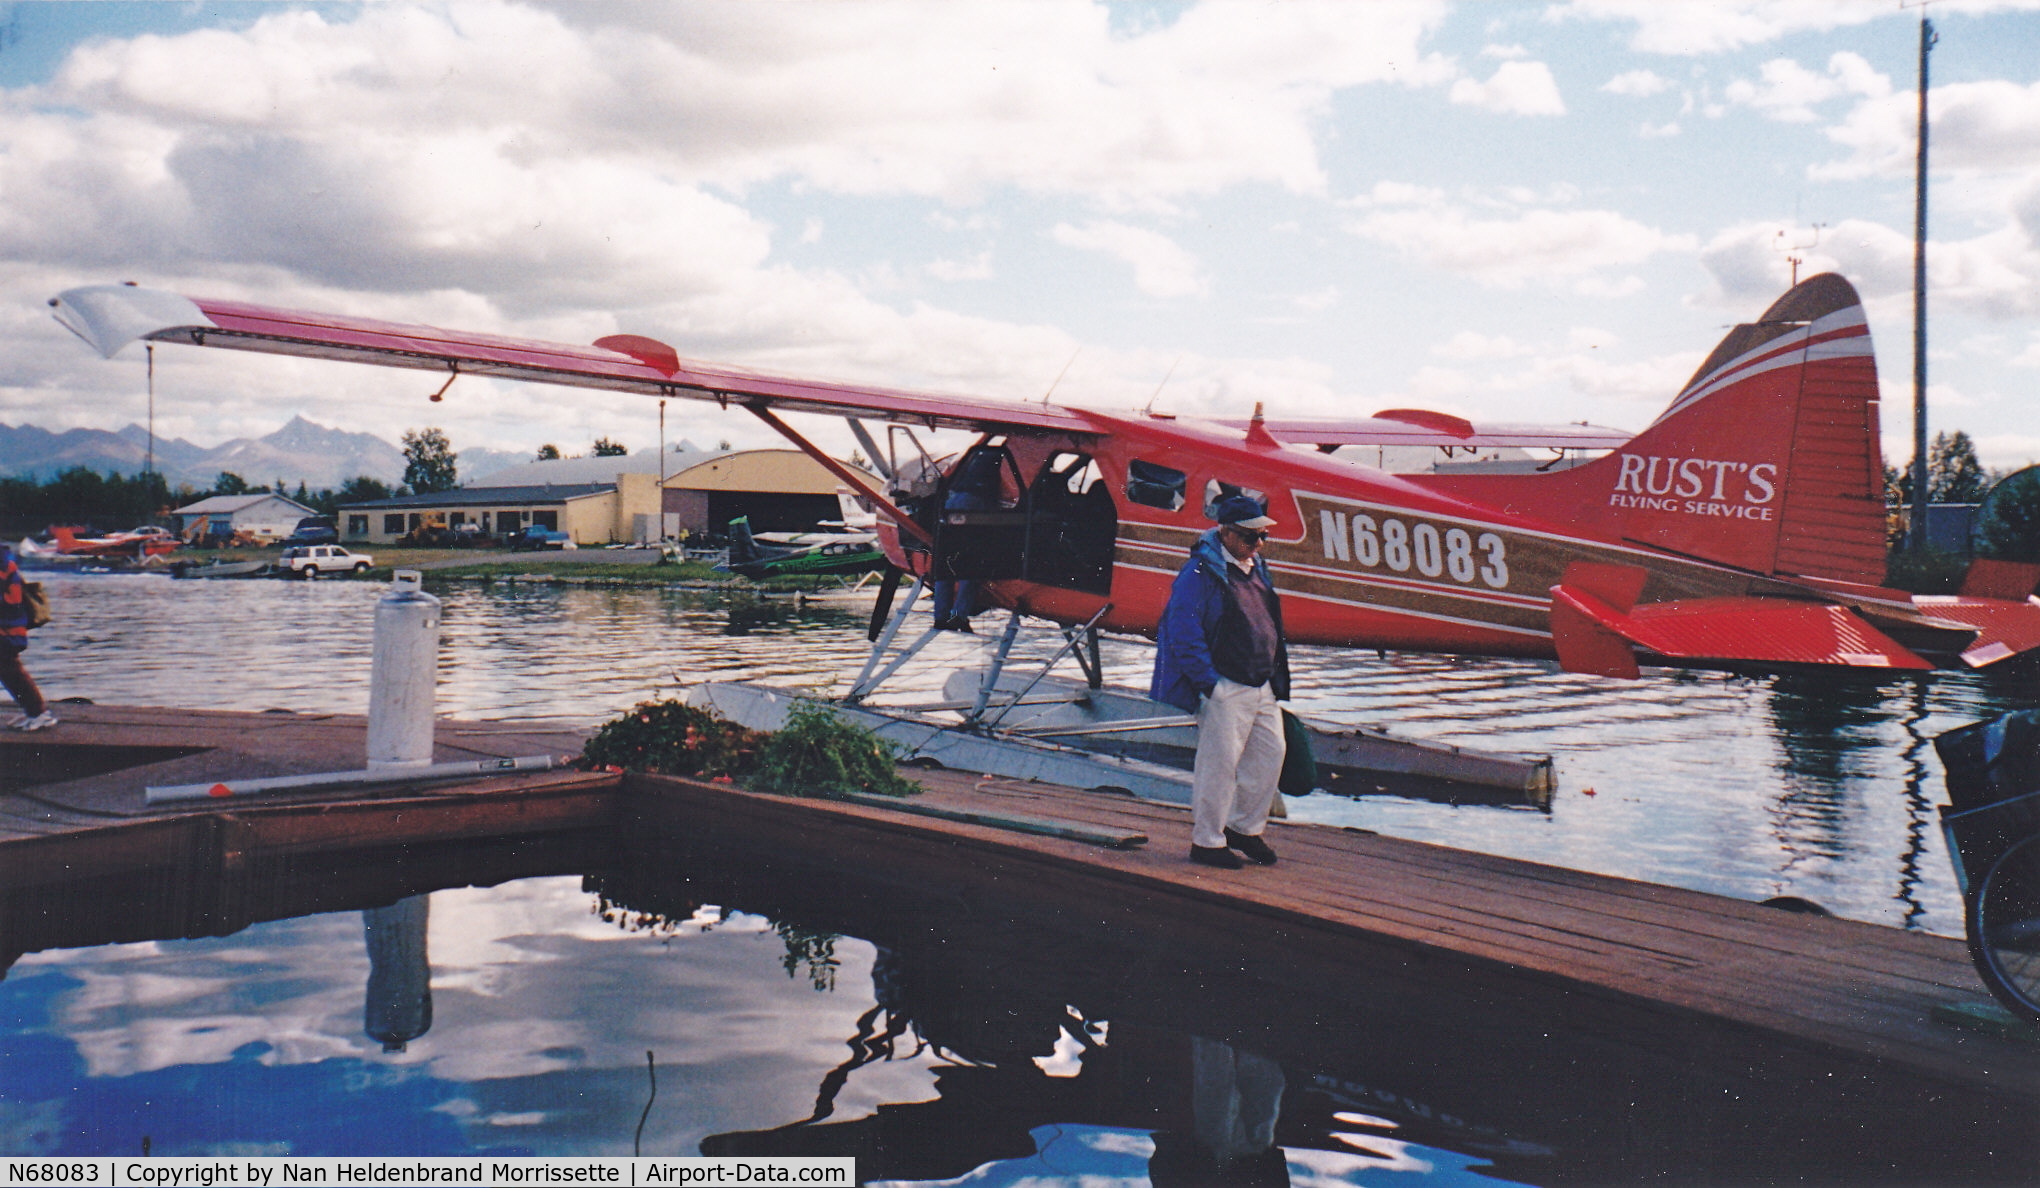 N68083, 1958 De Havilland Canada DHC-2 Beaver Mk.I C/N 1254, Ladd Heldenbrand, my father, inspecting our Rust's Beaver. From Anchorage to see Denali, the last week of August 2000. Never to be forgotten, a glorious flight.